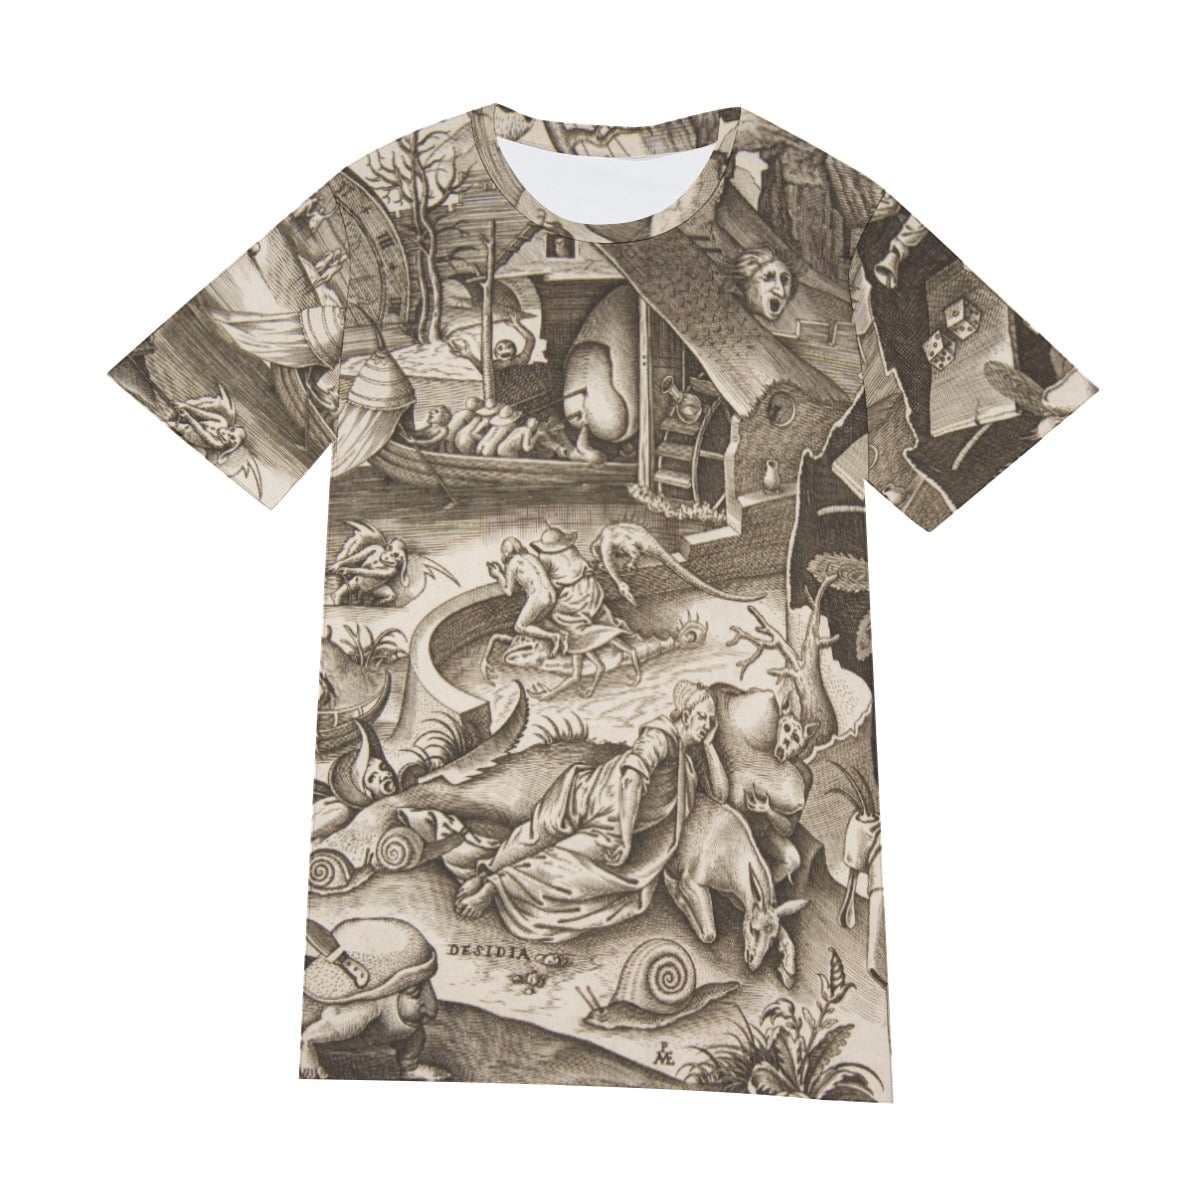 Sloth The Seven Deadly Sins by Hieronymus Bosch T-Shirt